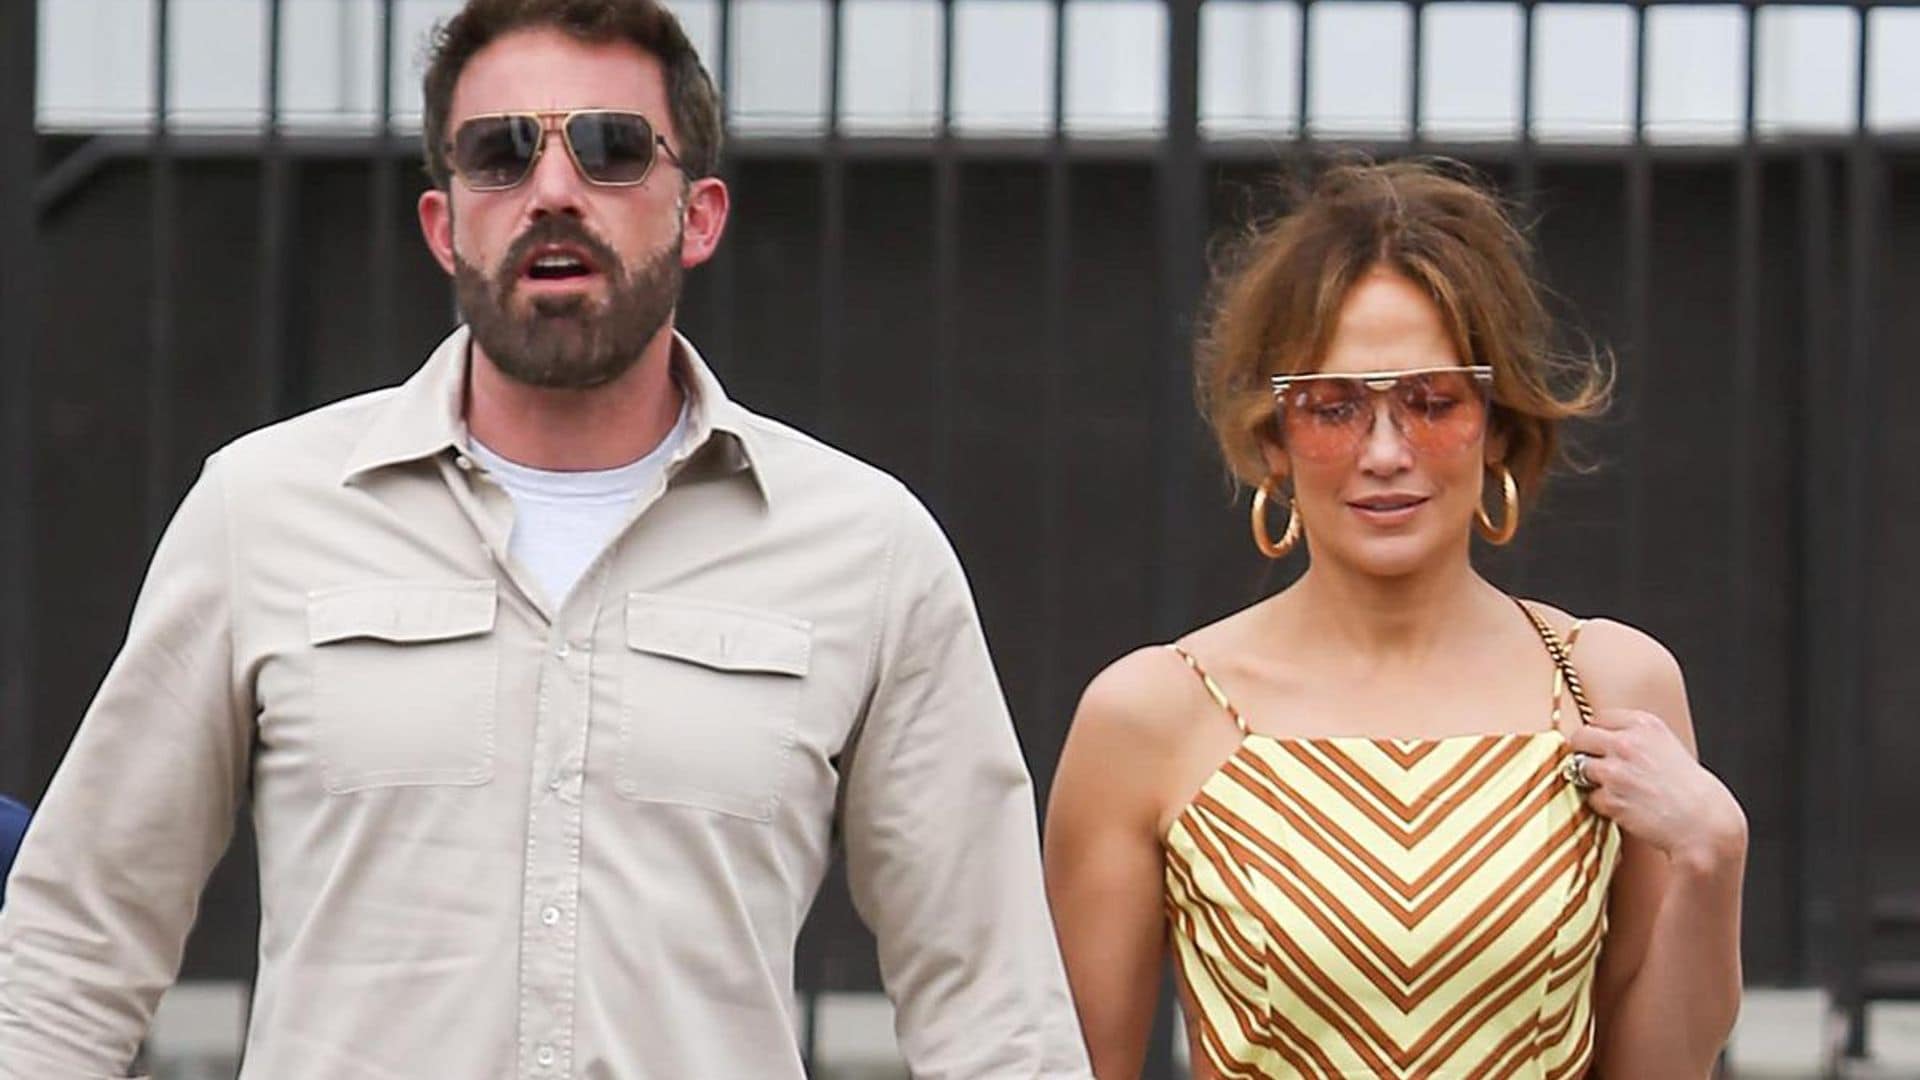 Jennifer Lopez wears the perfect summer look during romantic date with Ben Affleck